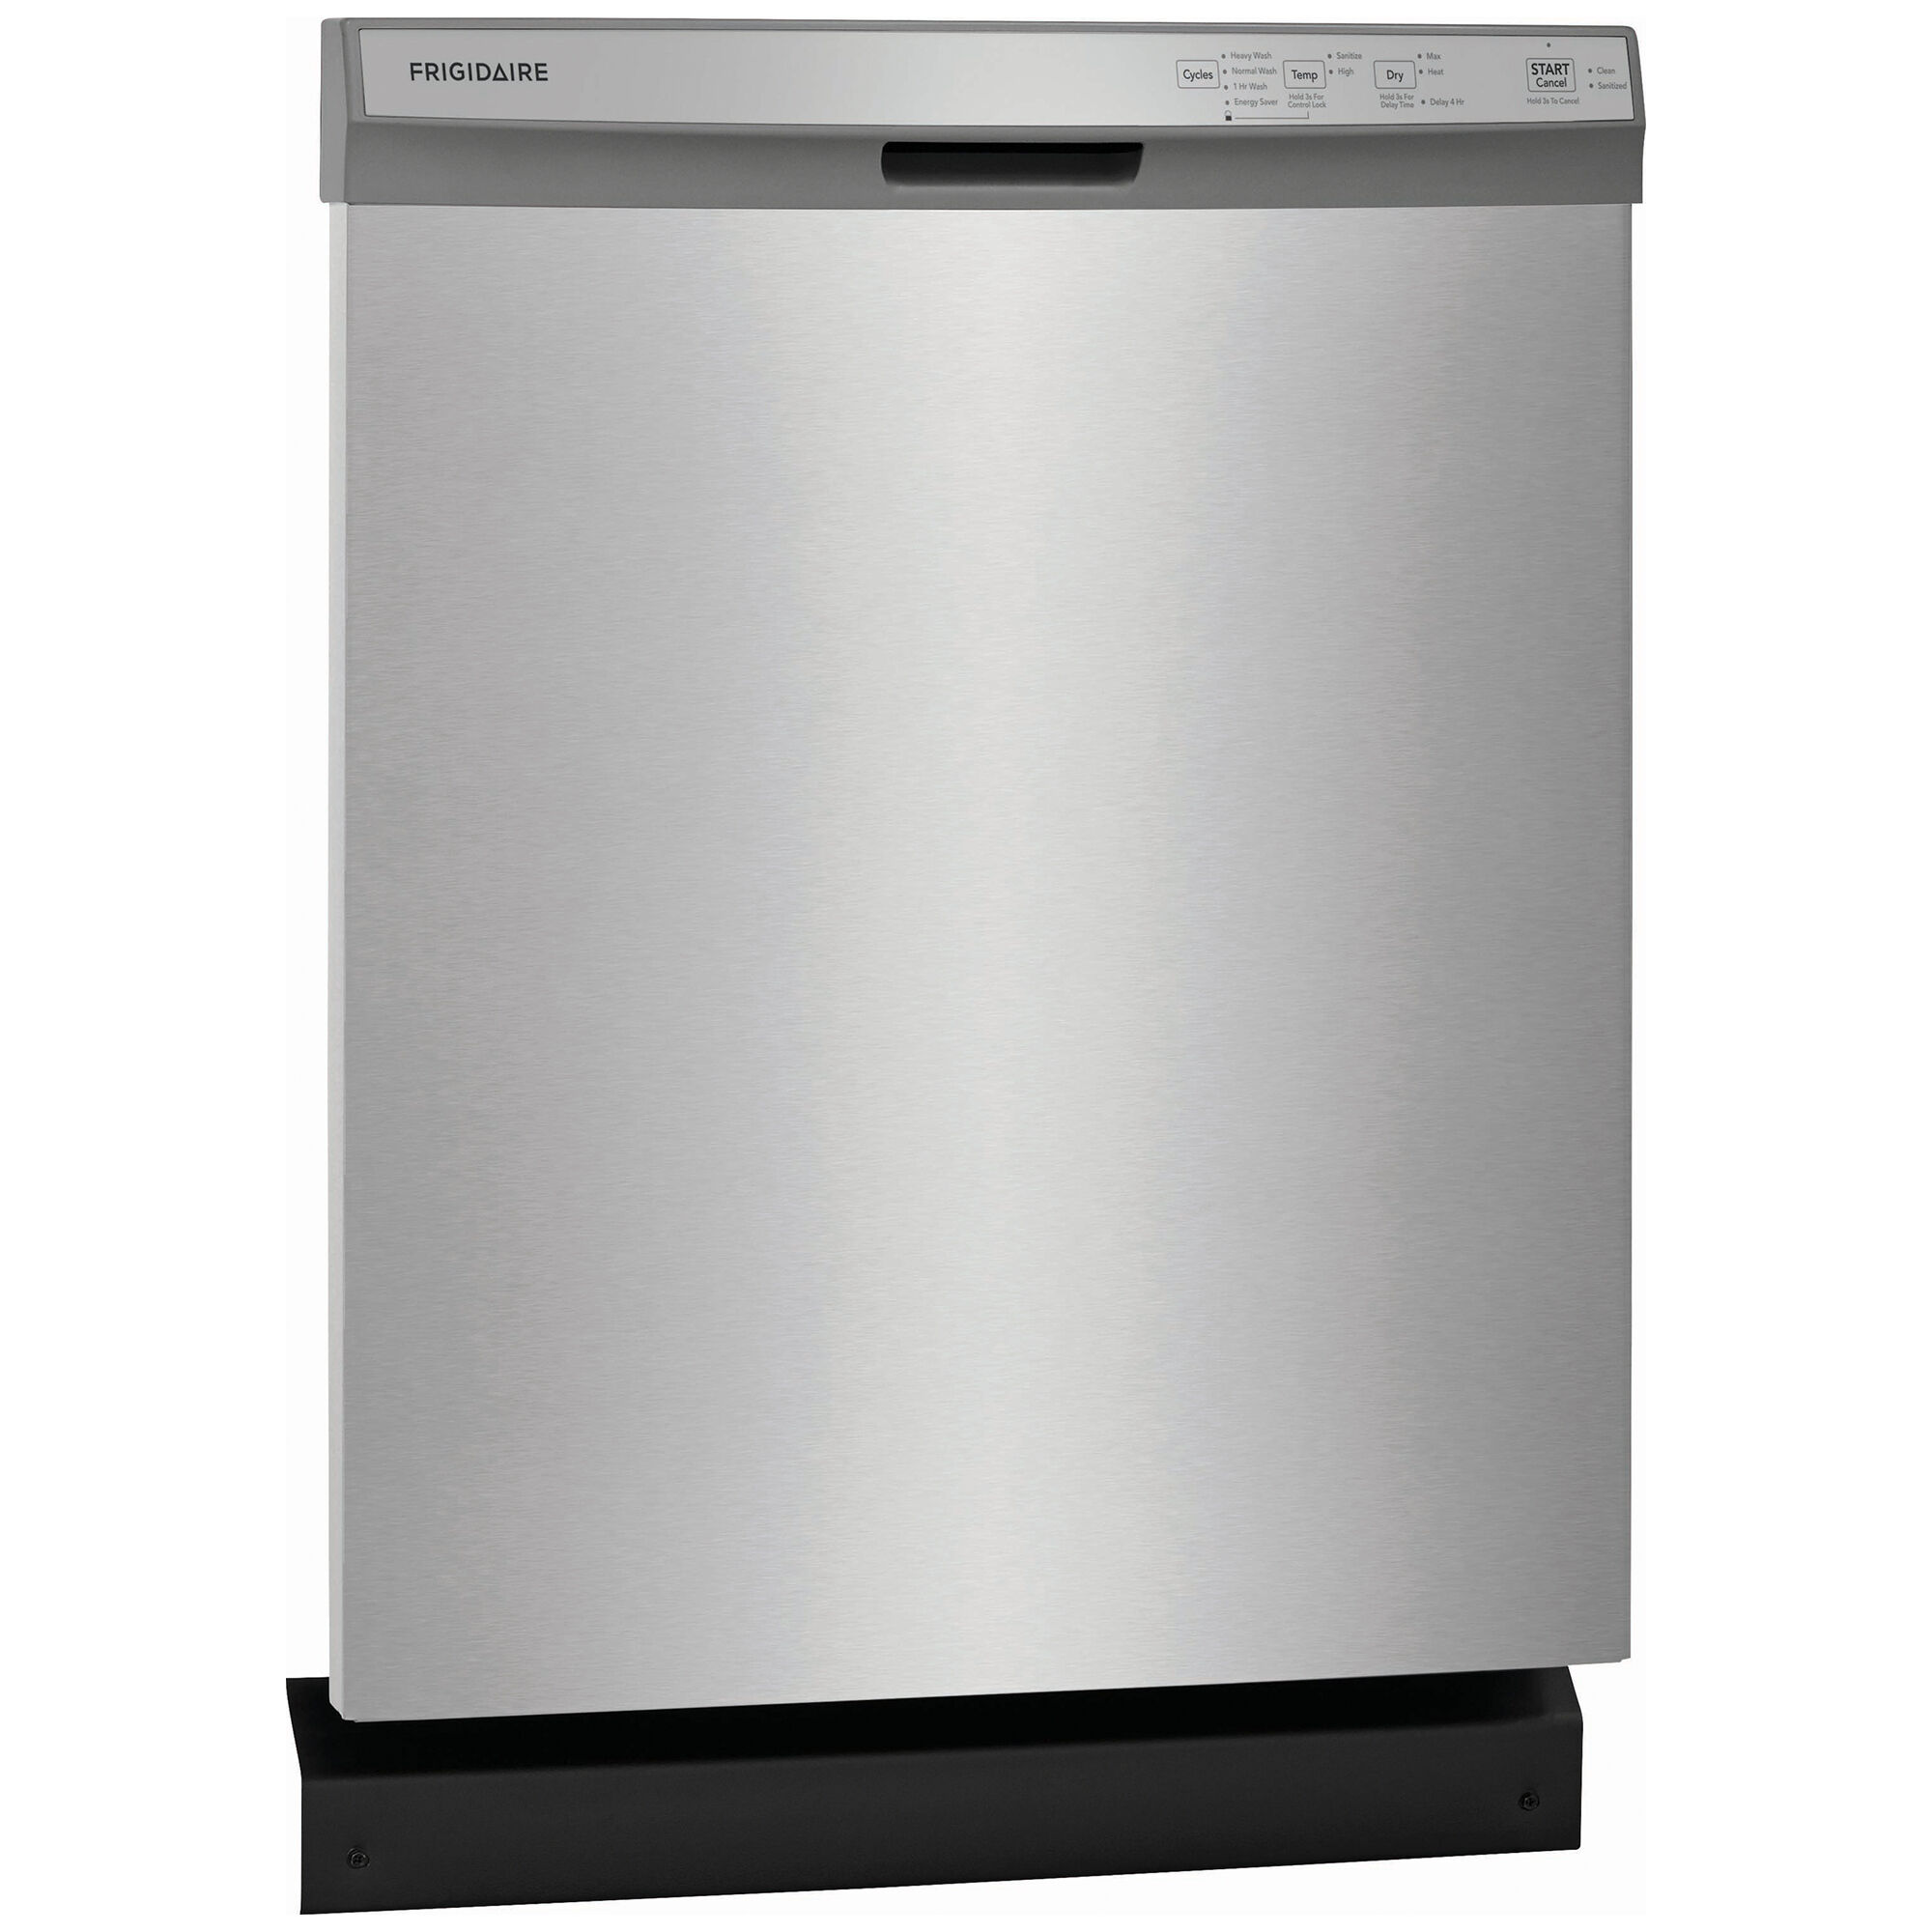 Frigidaire 24 in. Built-In Dishwasher with Front Control, 54 dBA Sound  Level, 14 Place Settings, 4 Wash Cycles & Sanitize Cycle - Stainless Steel